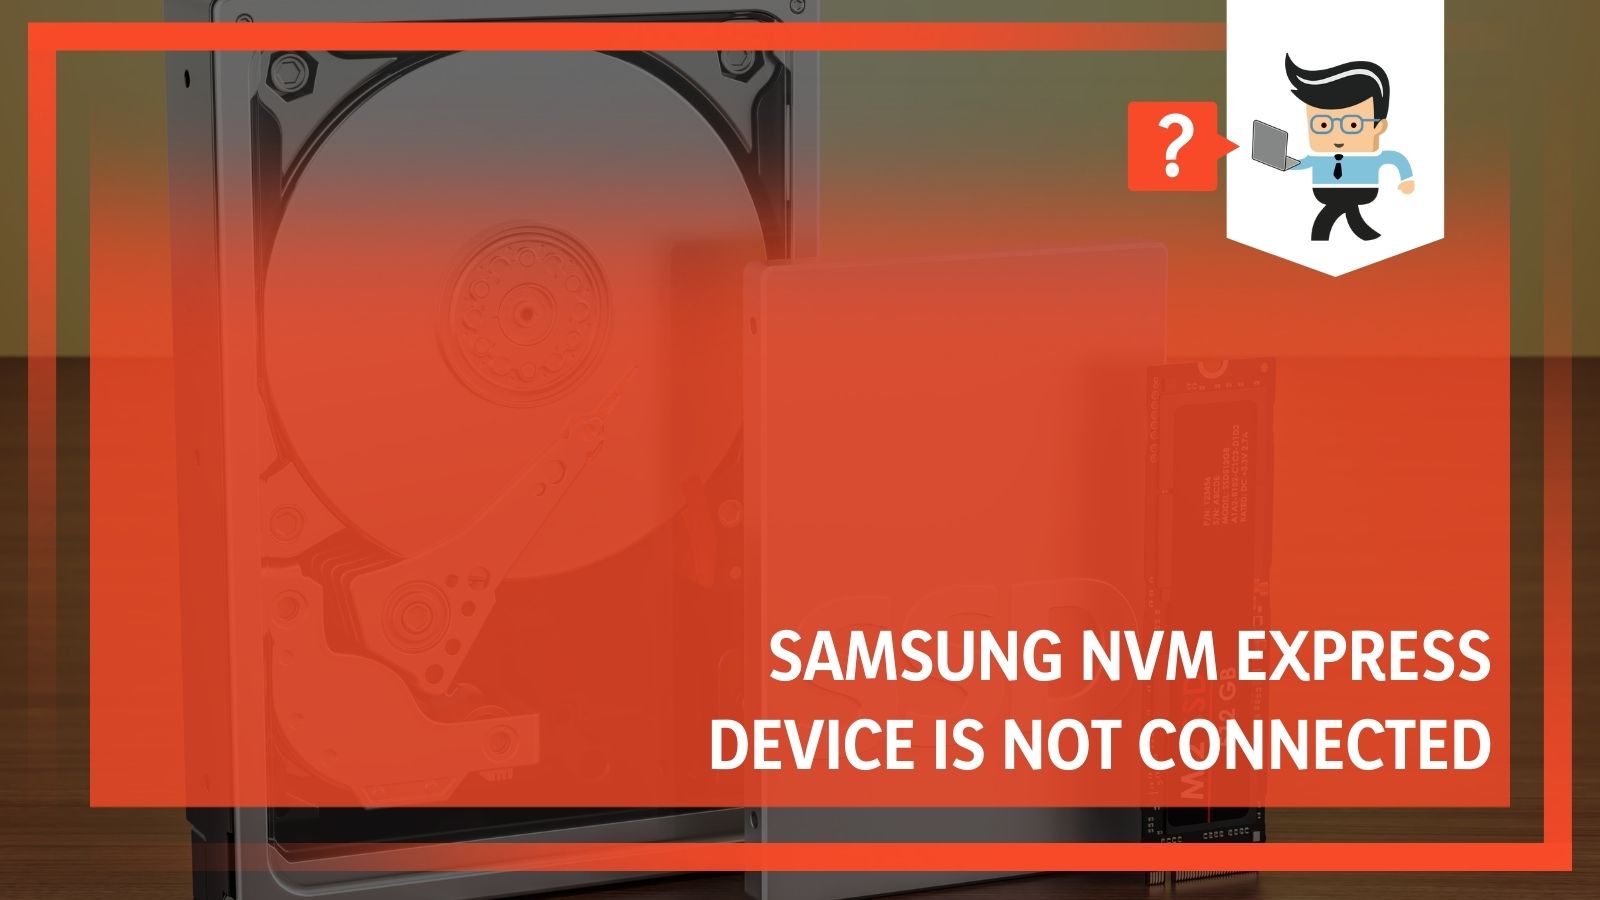 Samsung NVM Express Device Is Not Connected